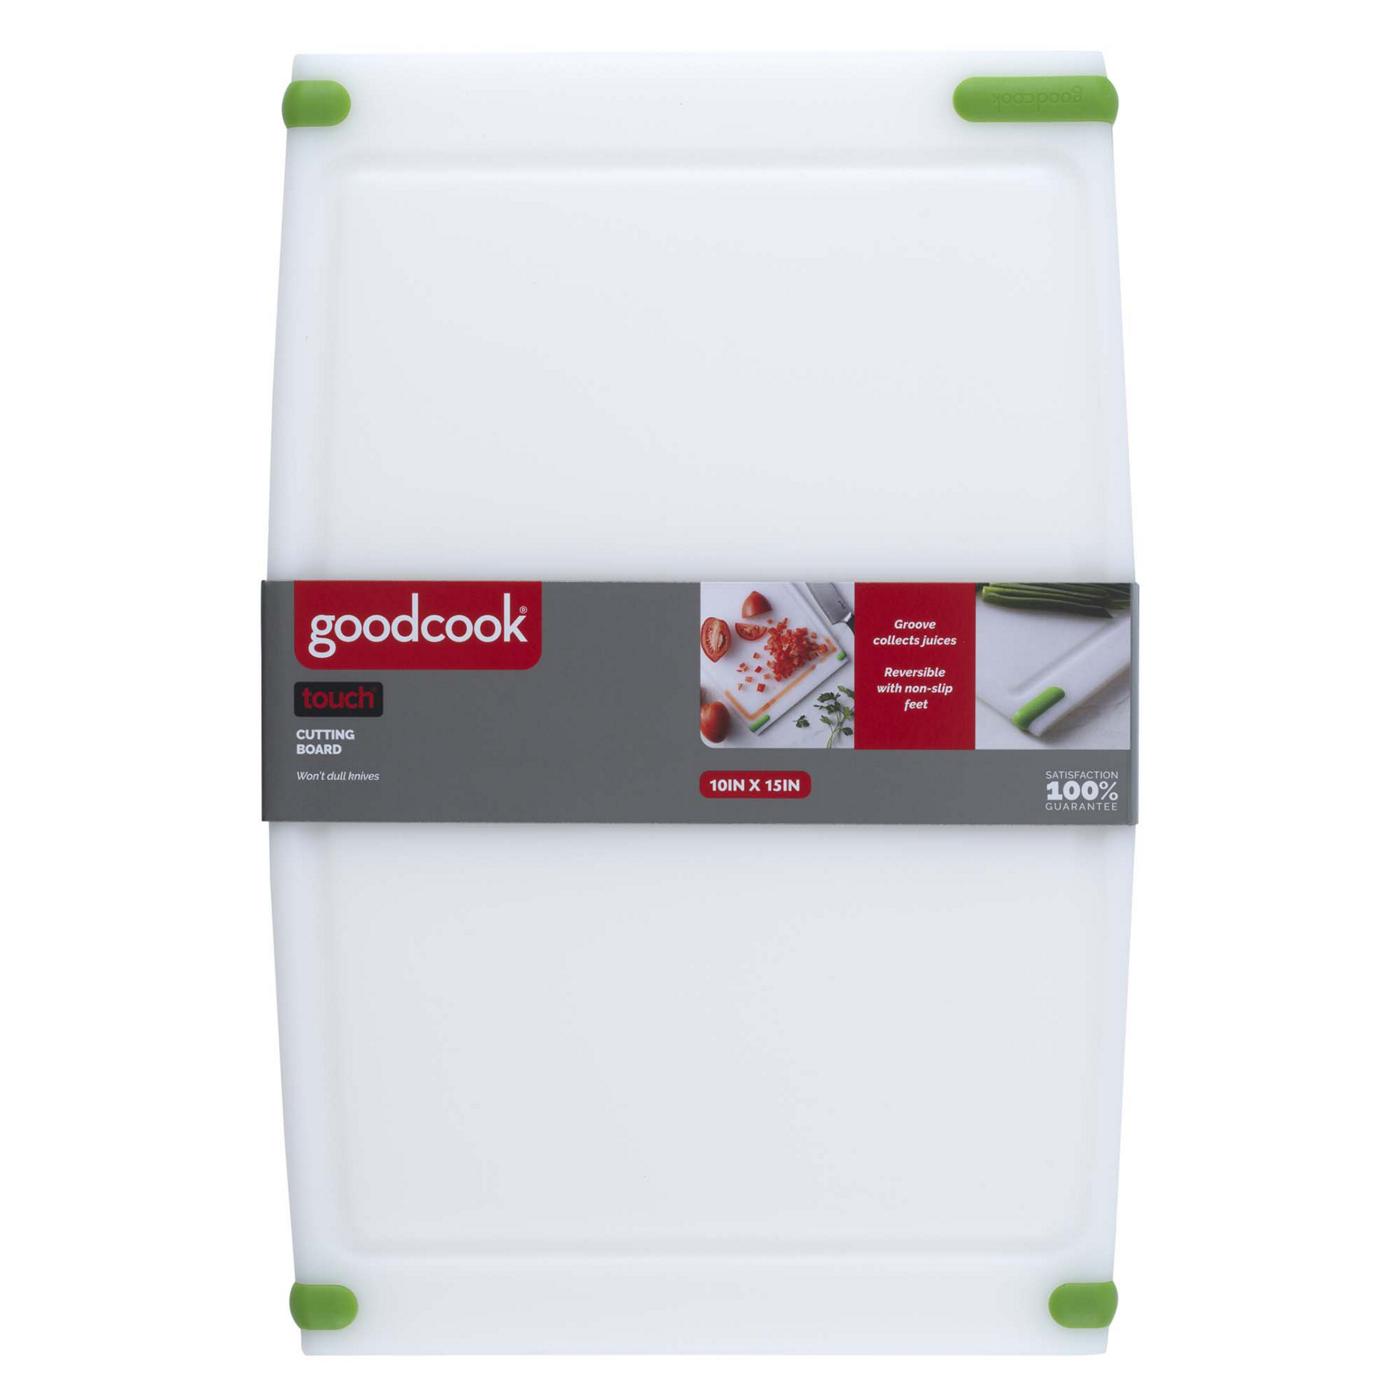 GoodCook Touch Plastic Cutting Board; image 1 of 4